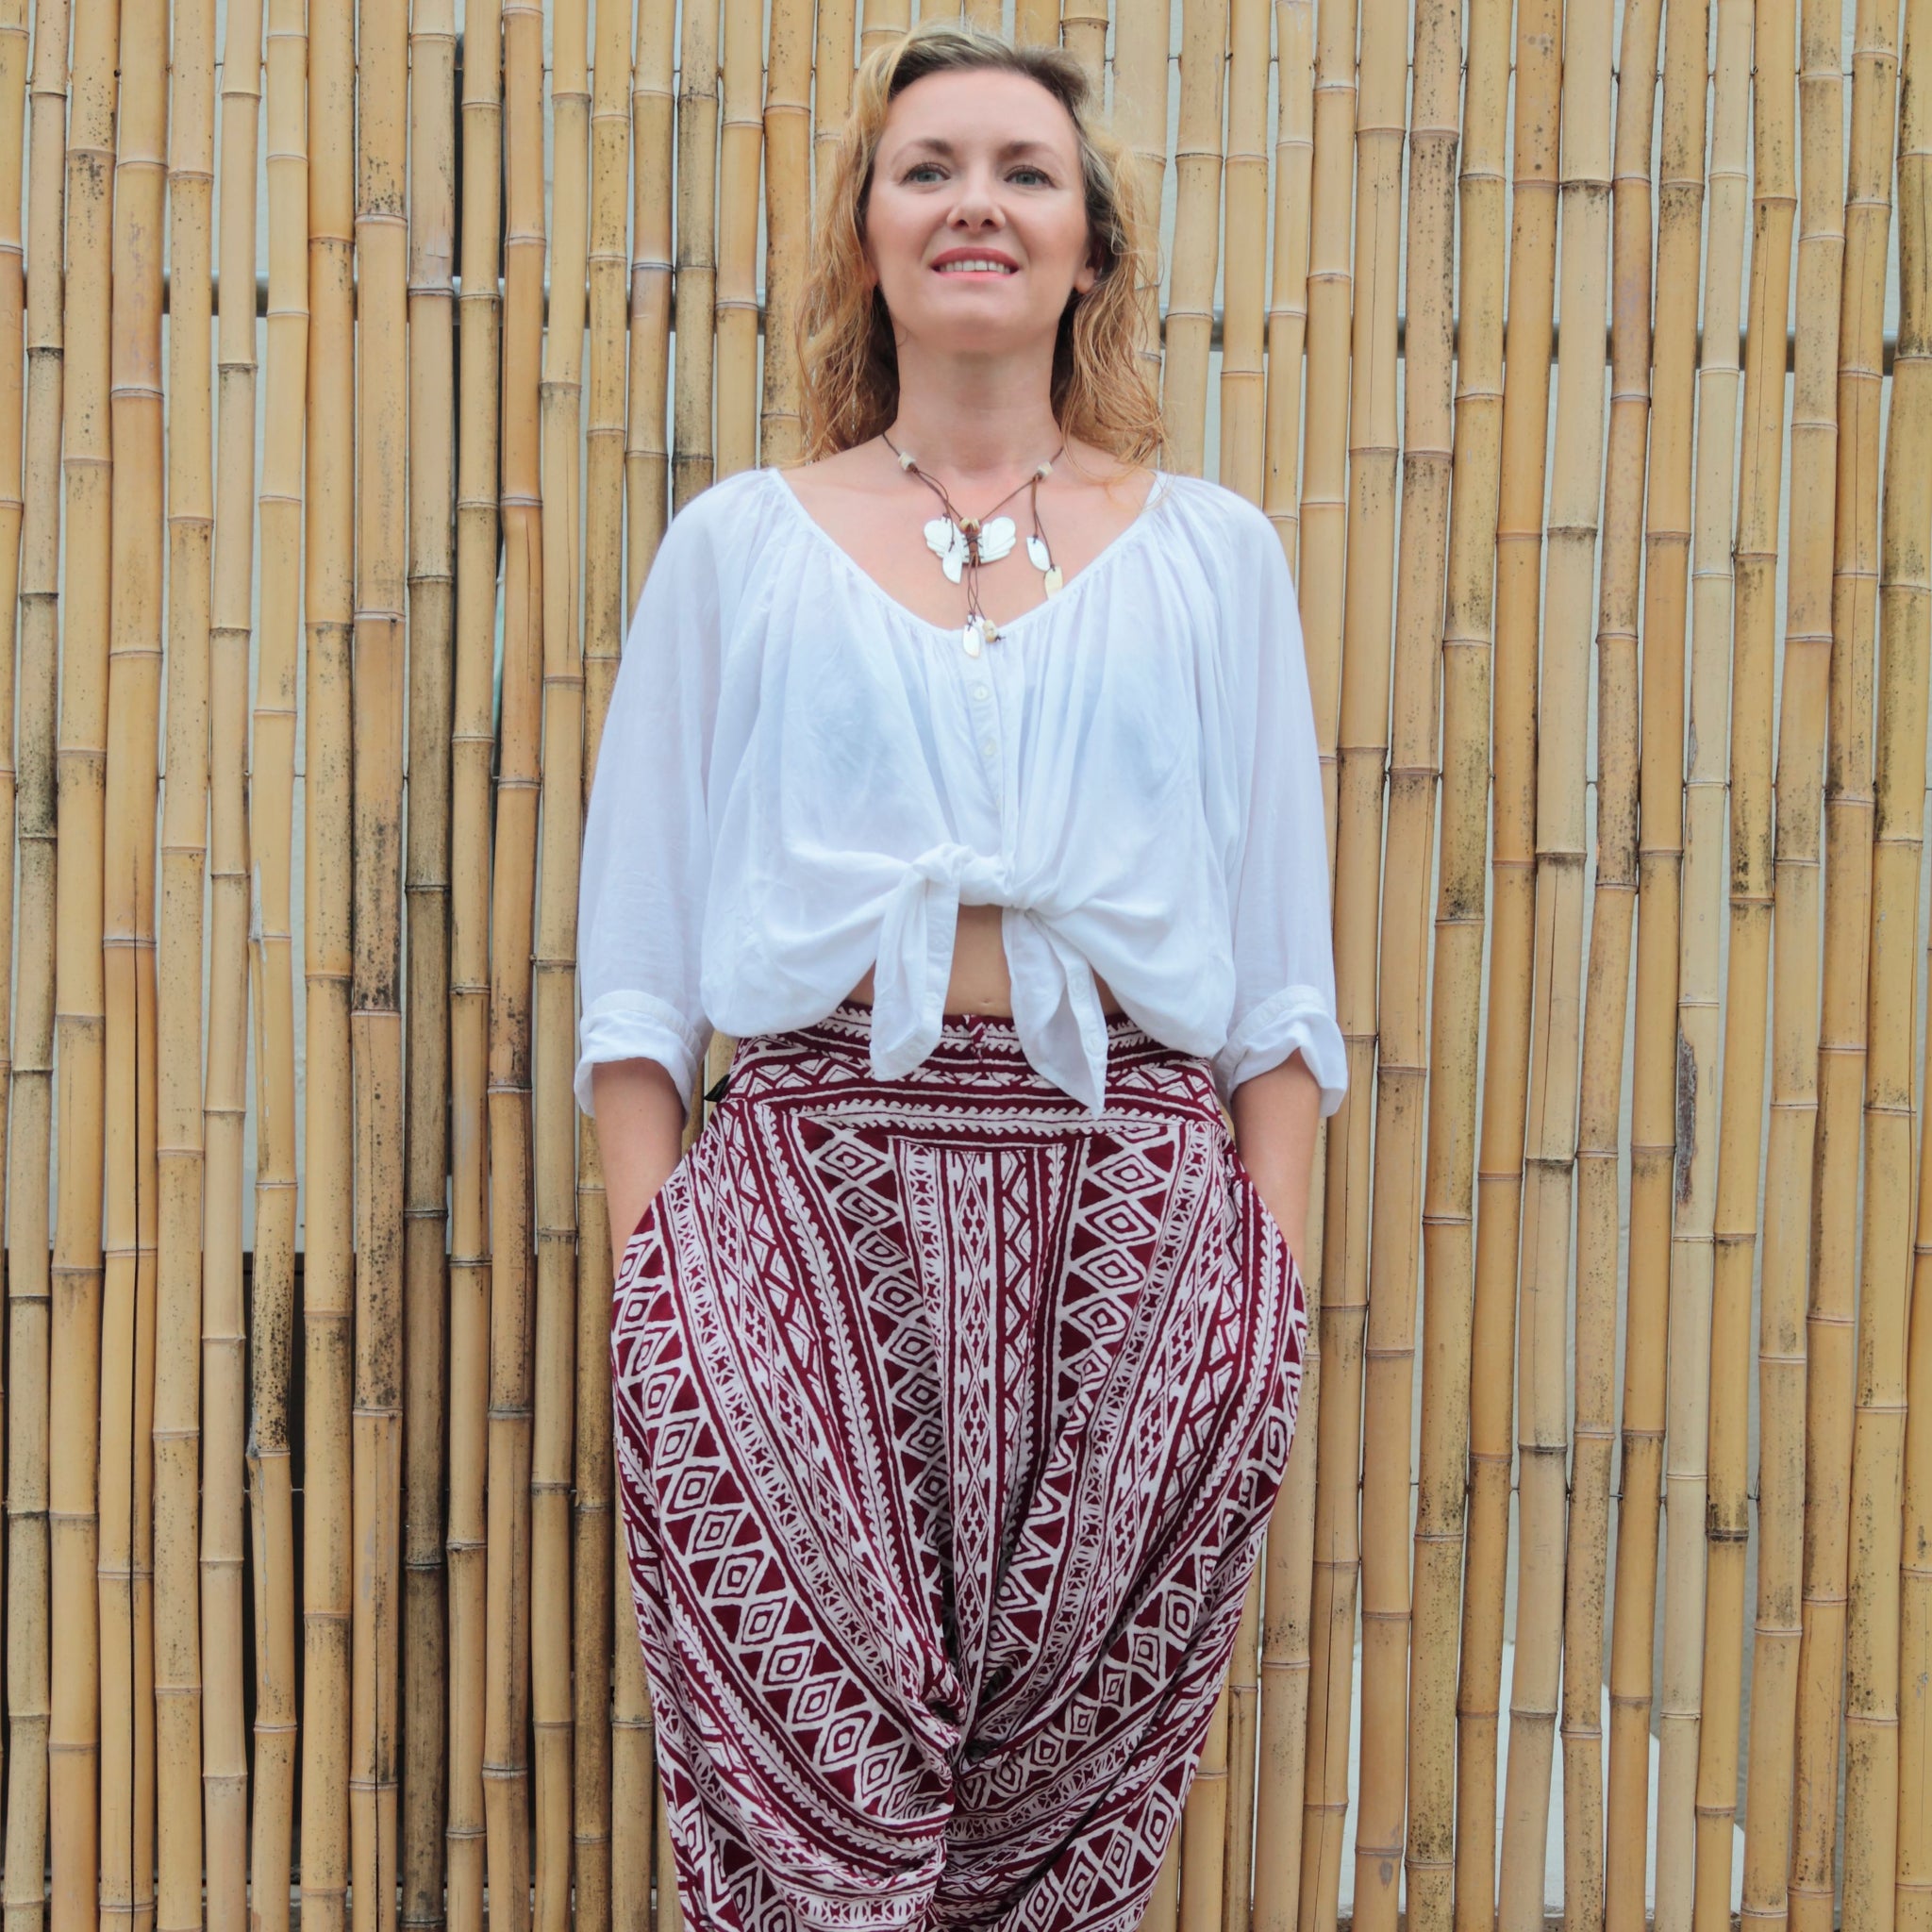 Weekend plans just got an upgrade! Our Boho harem pants are